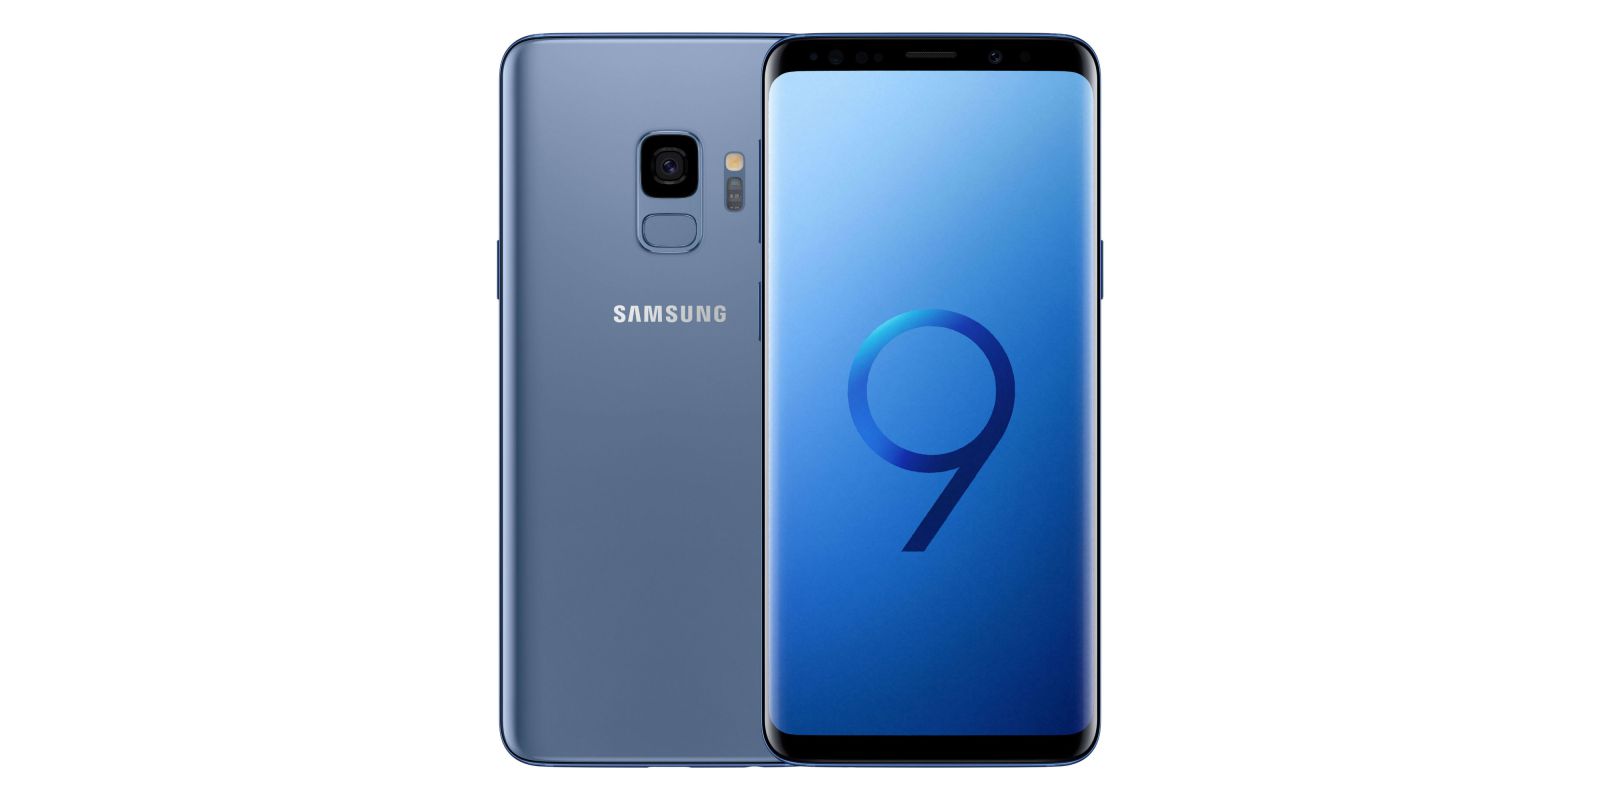 At the presentation of Samsung Galaxy S9 will be a lot of augmented reality